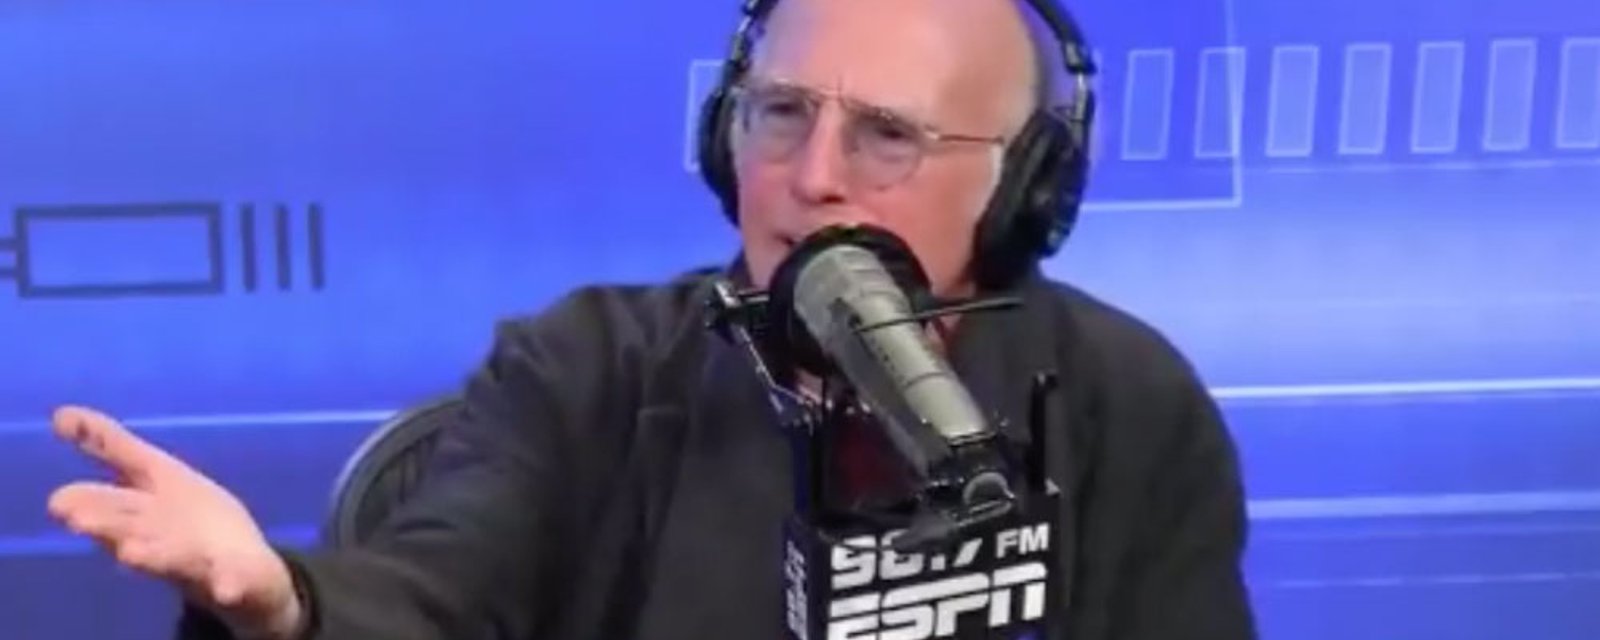 Larry David rips Rangers coach David Quinn like only he can